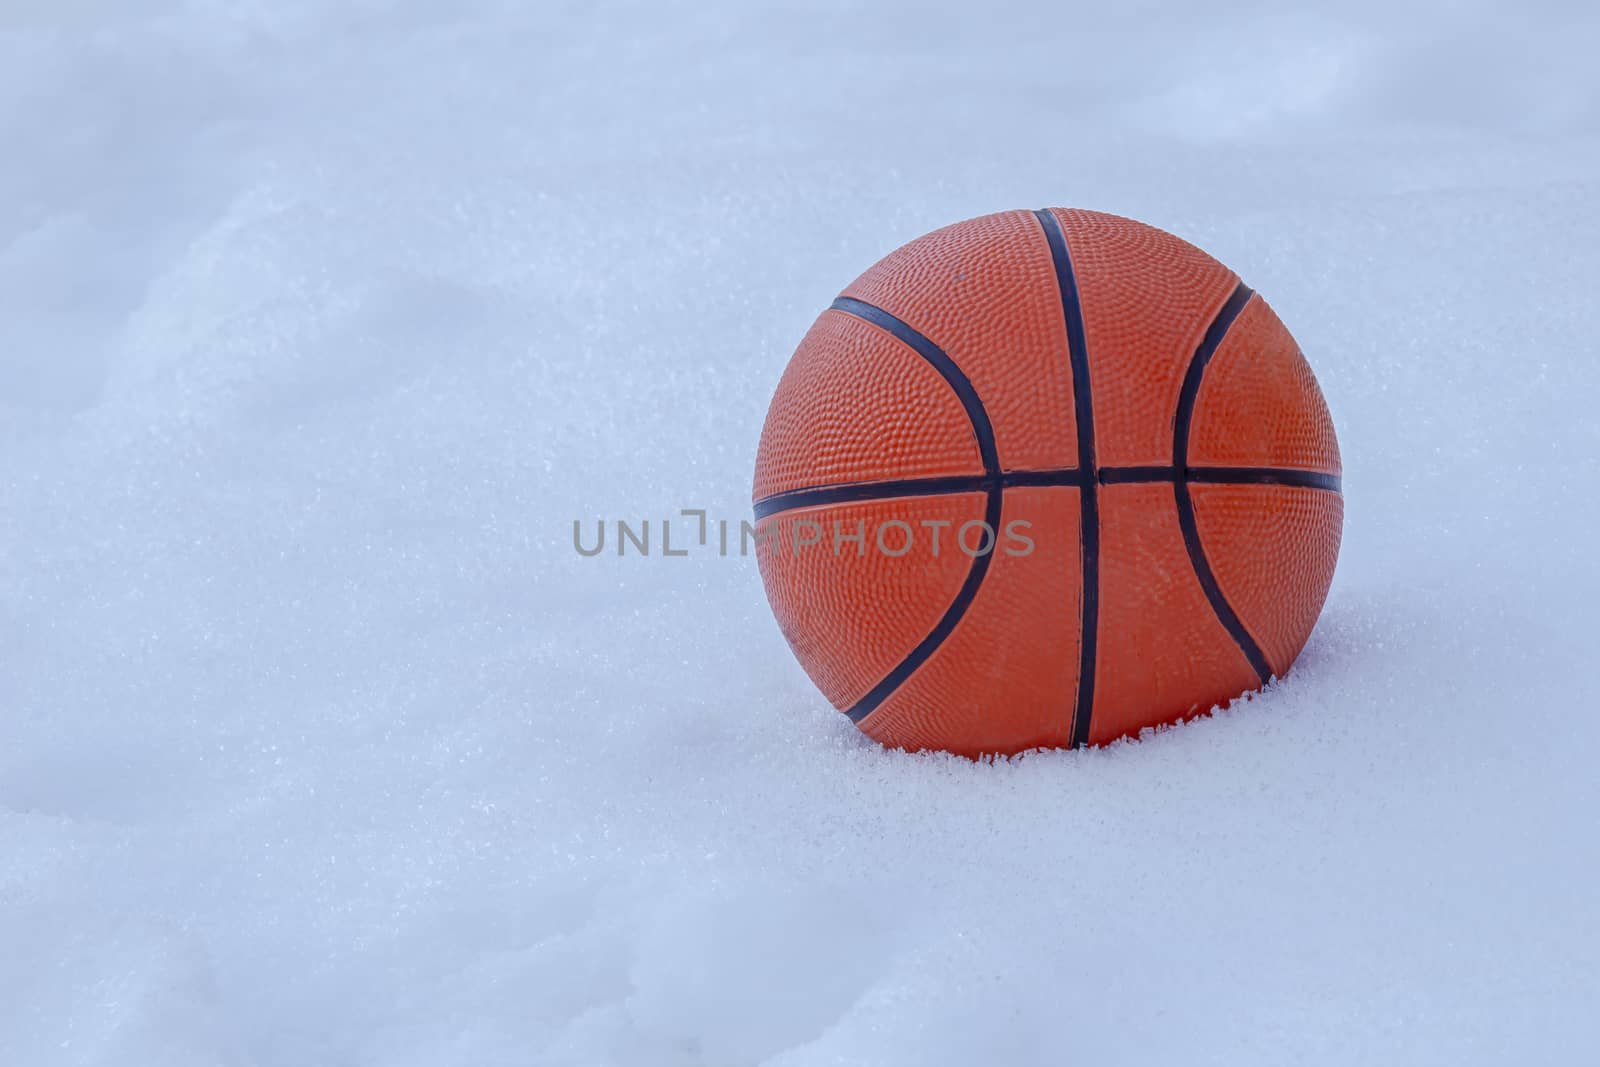 Basket ball on snow during winter